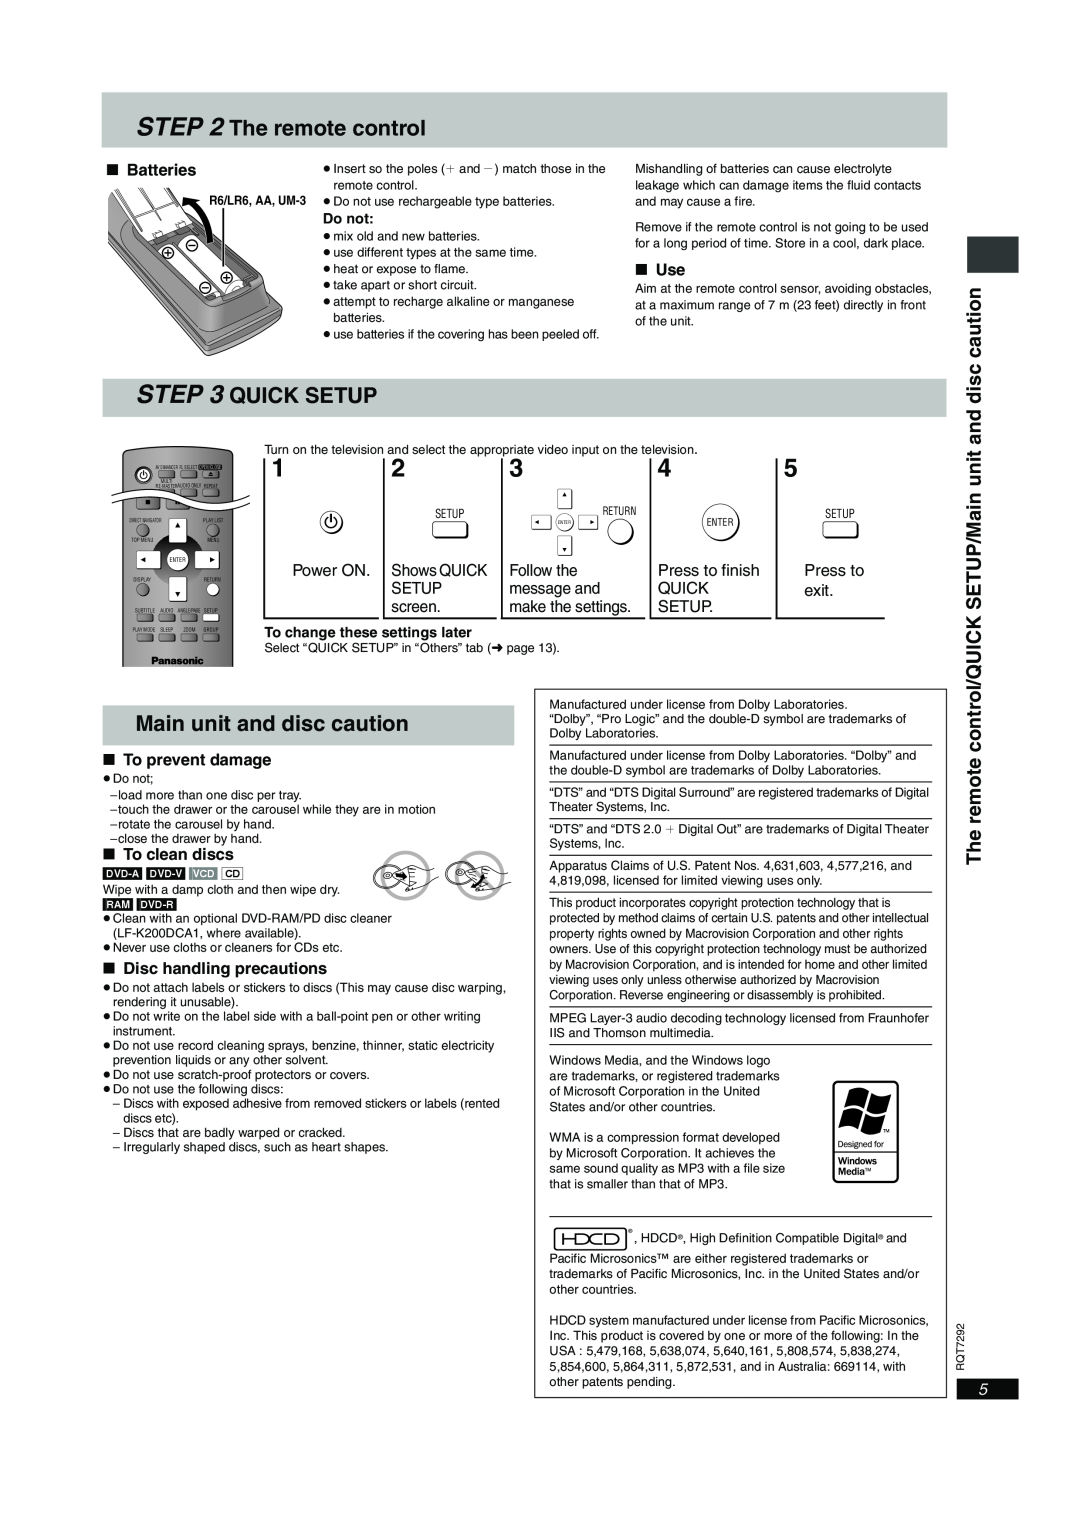 Panasonic DVD-F84 important safety instructions The remote control, Quick Setup, Main unit and disc caution 